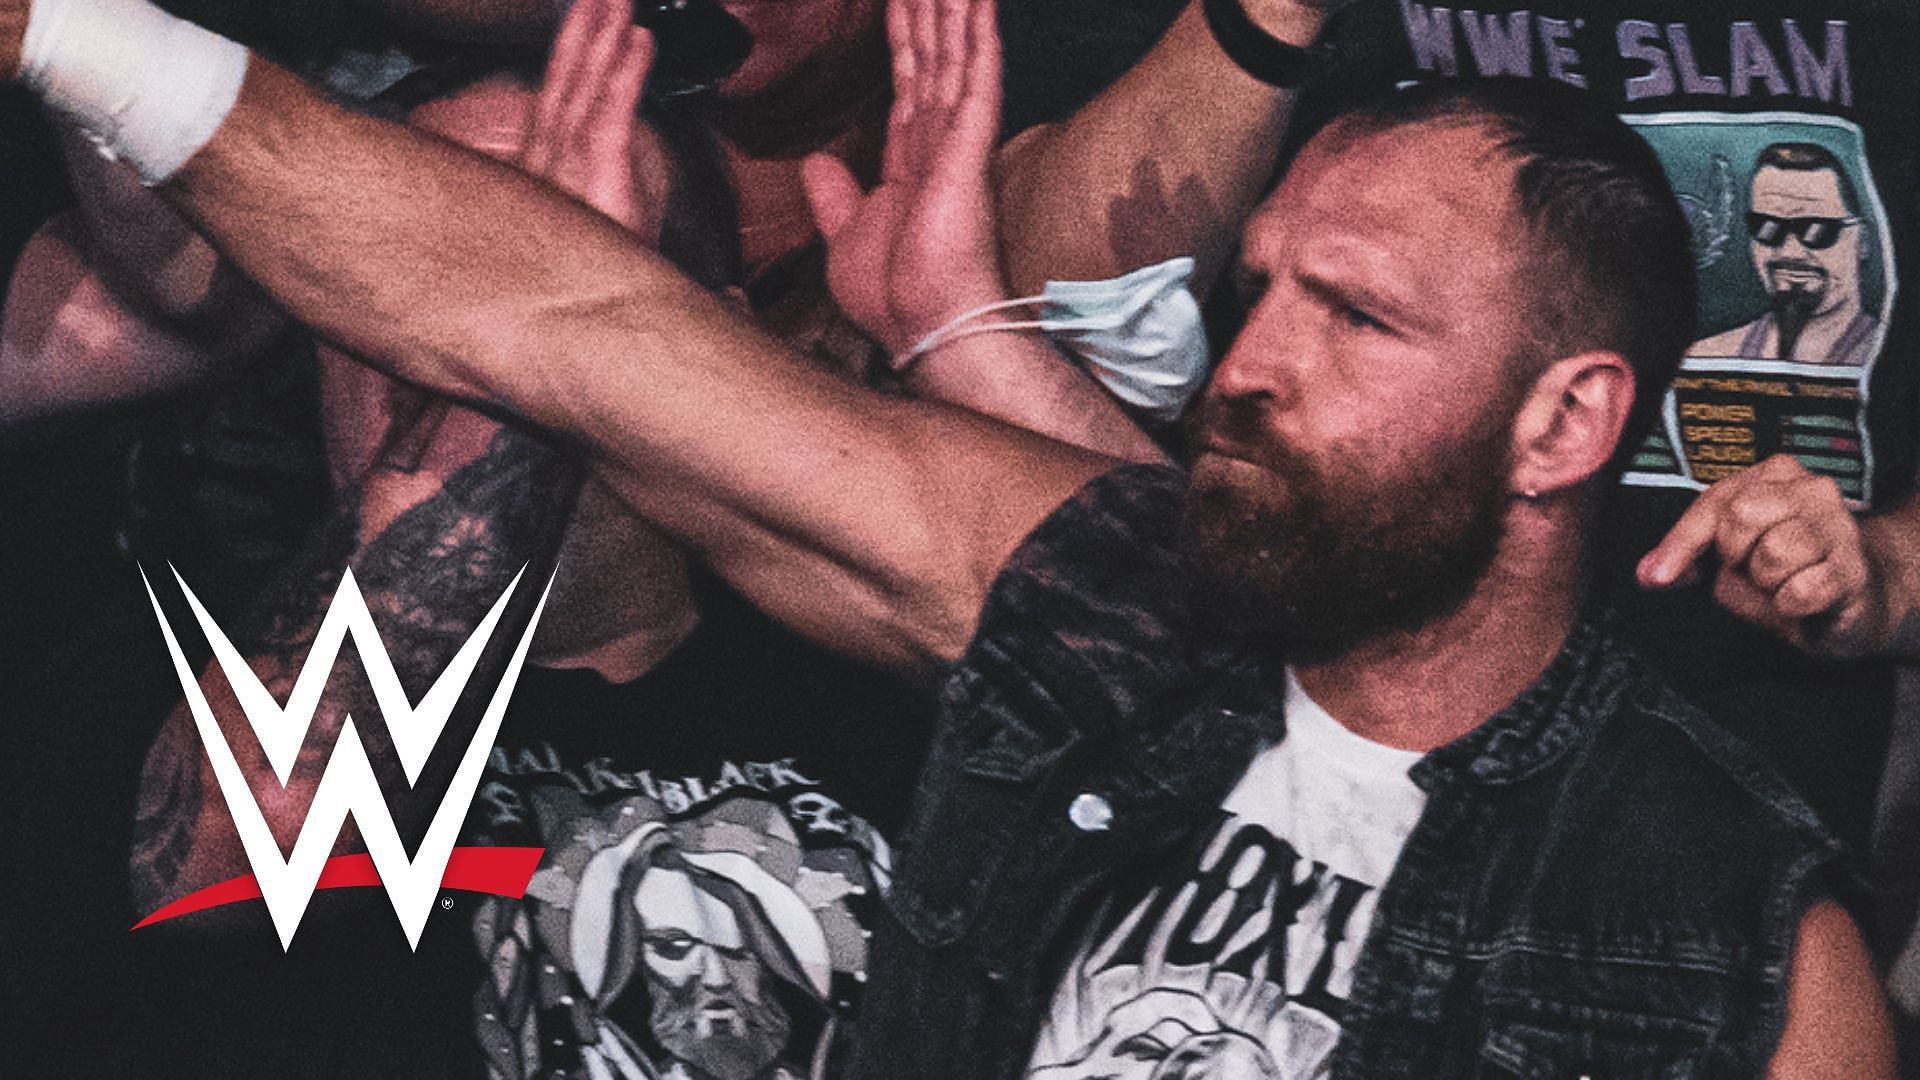 Jon Moxley at AEW Double or Nothing 2022 (credit: Jay Lee Photography)